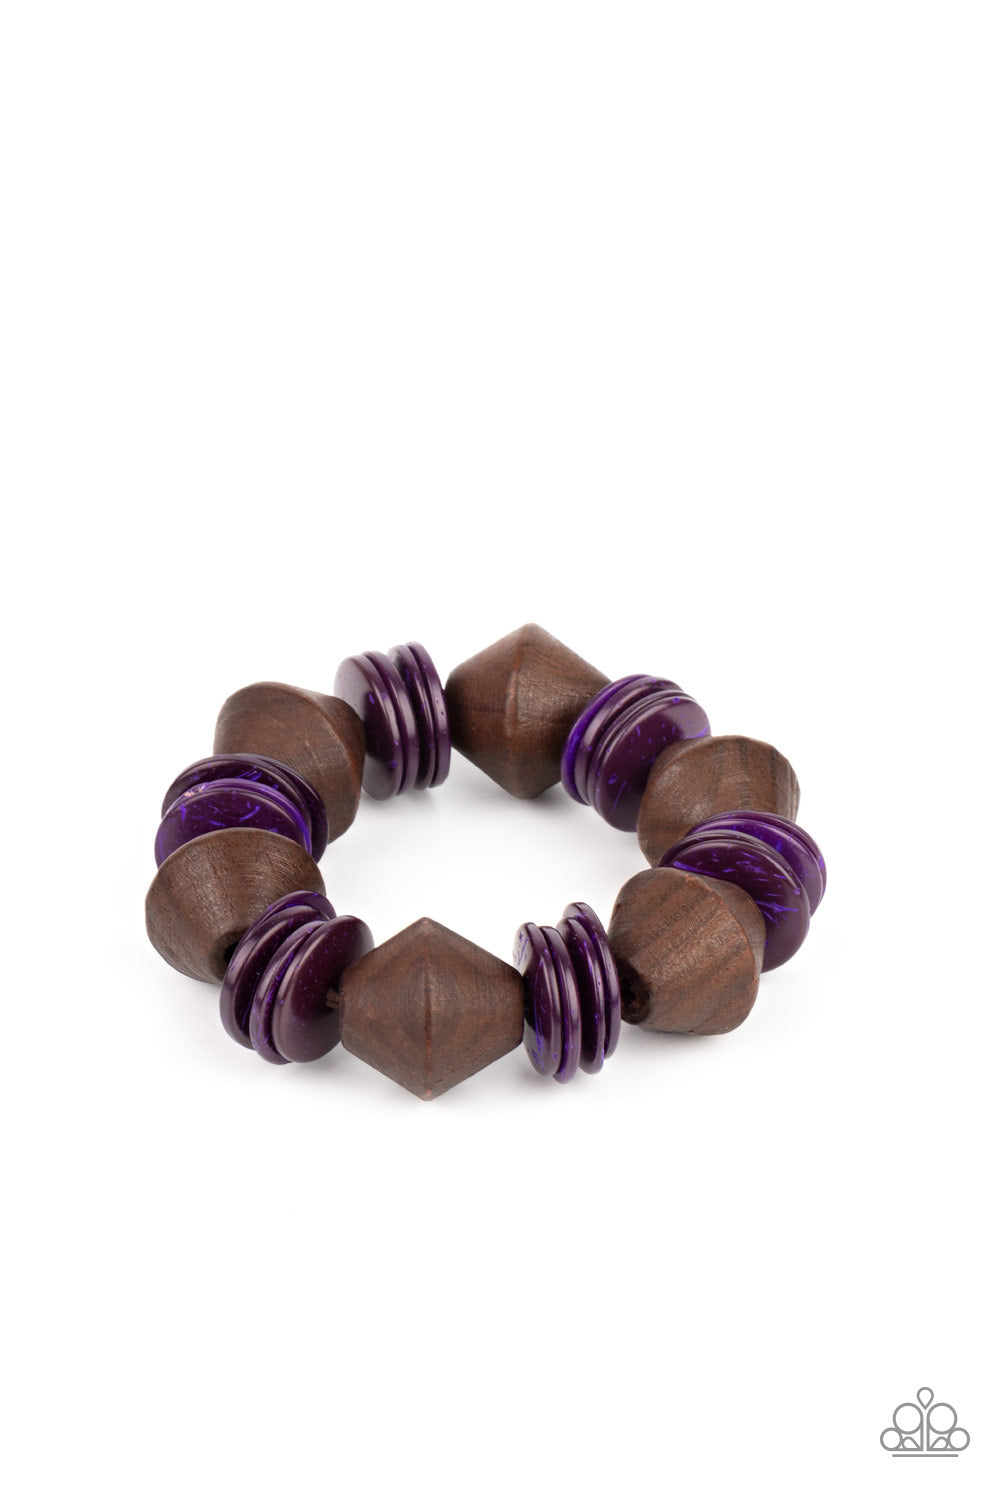 Bermuda Boardwalk Purple Wooden Bracelet - Paparazzi Accessories  Purple wooden discs and chunky brown wooden beads are threaded along a stretchy band around the wrist, creating a summery look.  All Paparazzi Accessories are lead free and nickel free!  Sold as one individual bracelet.